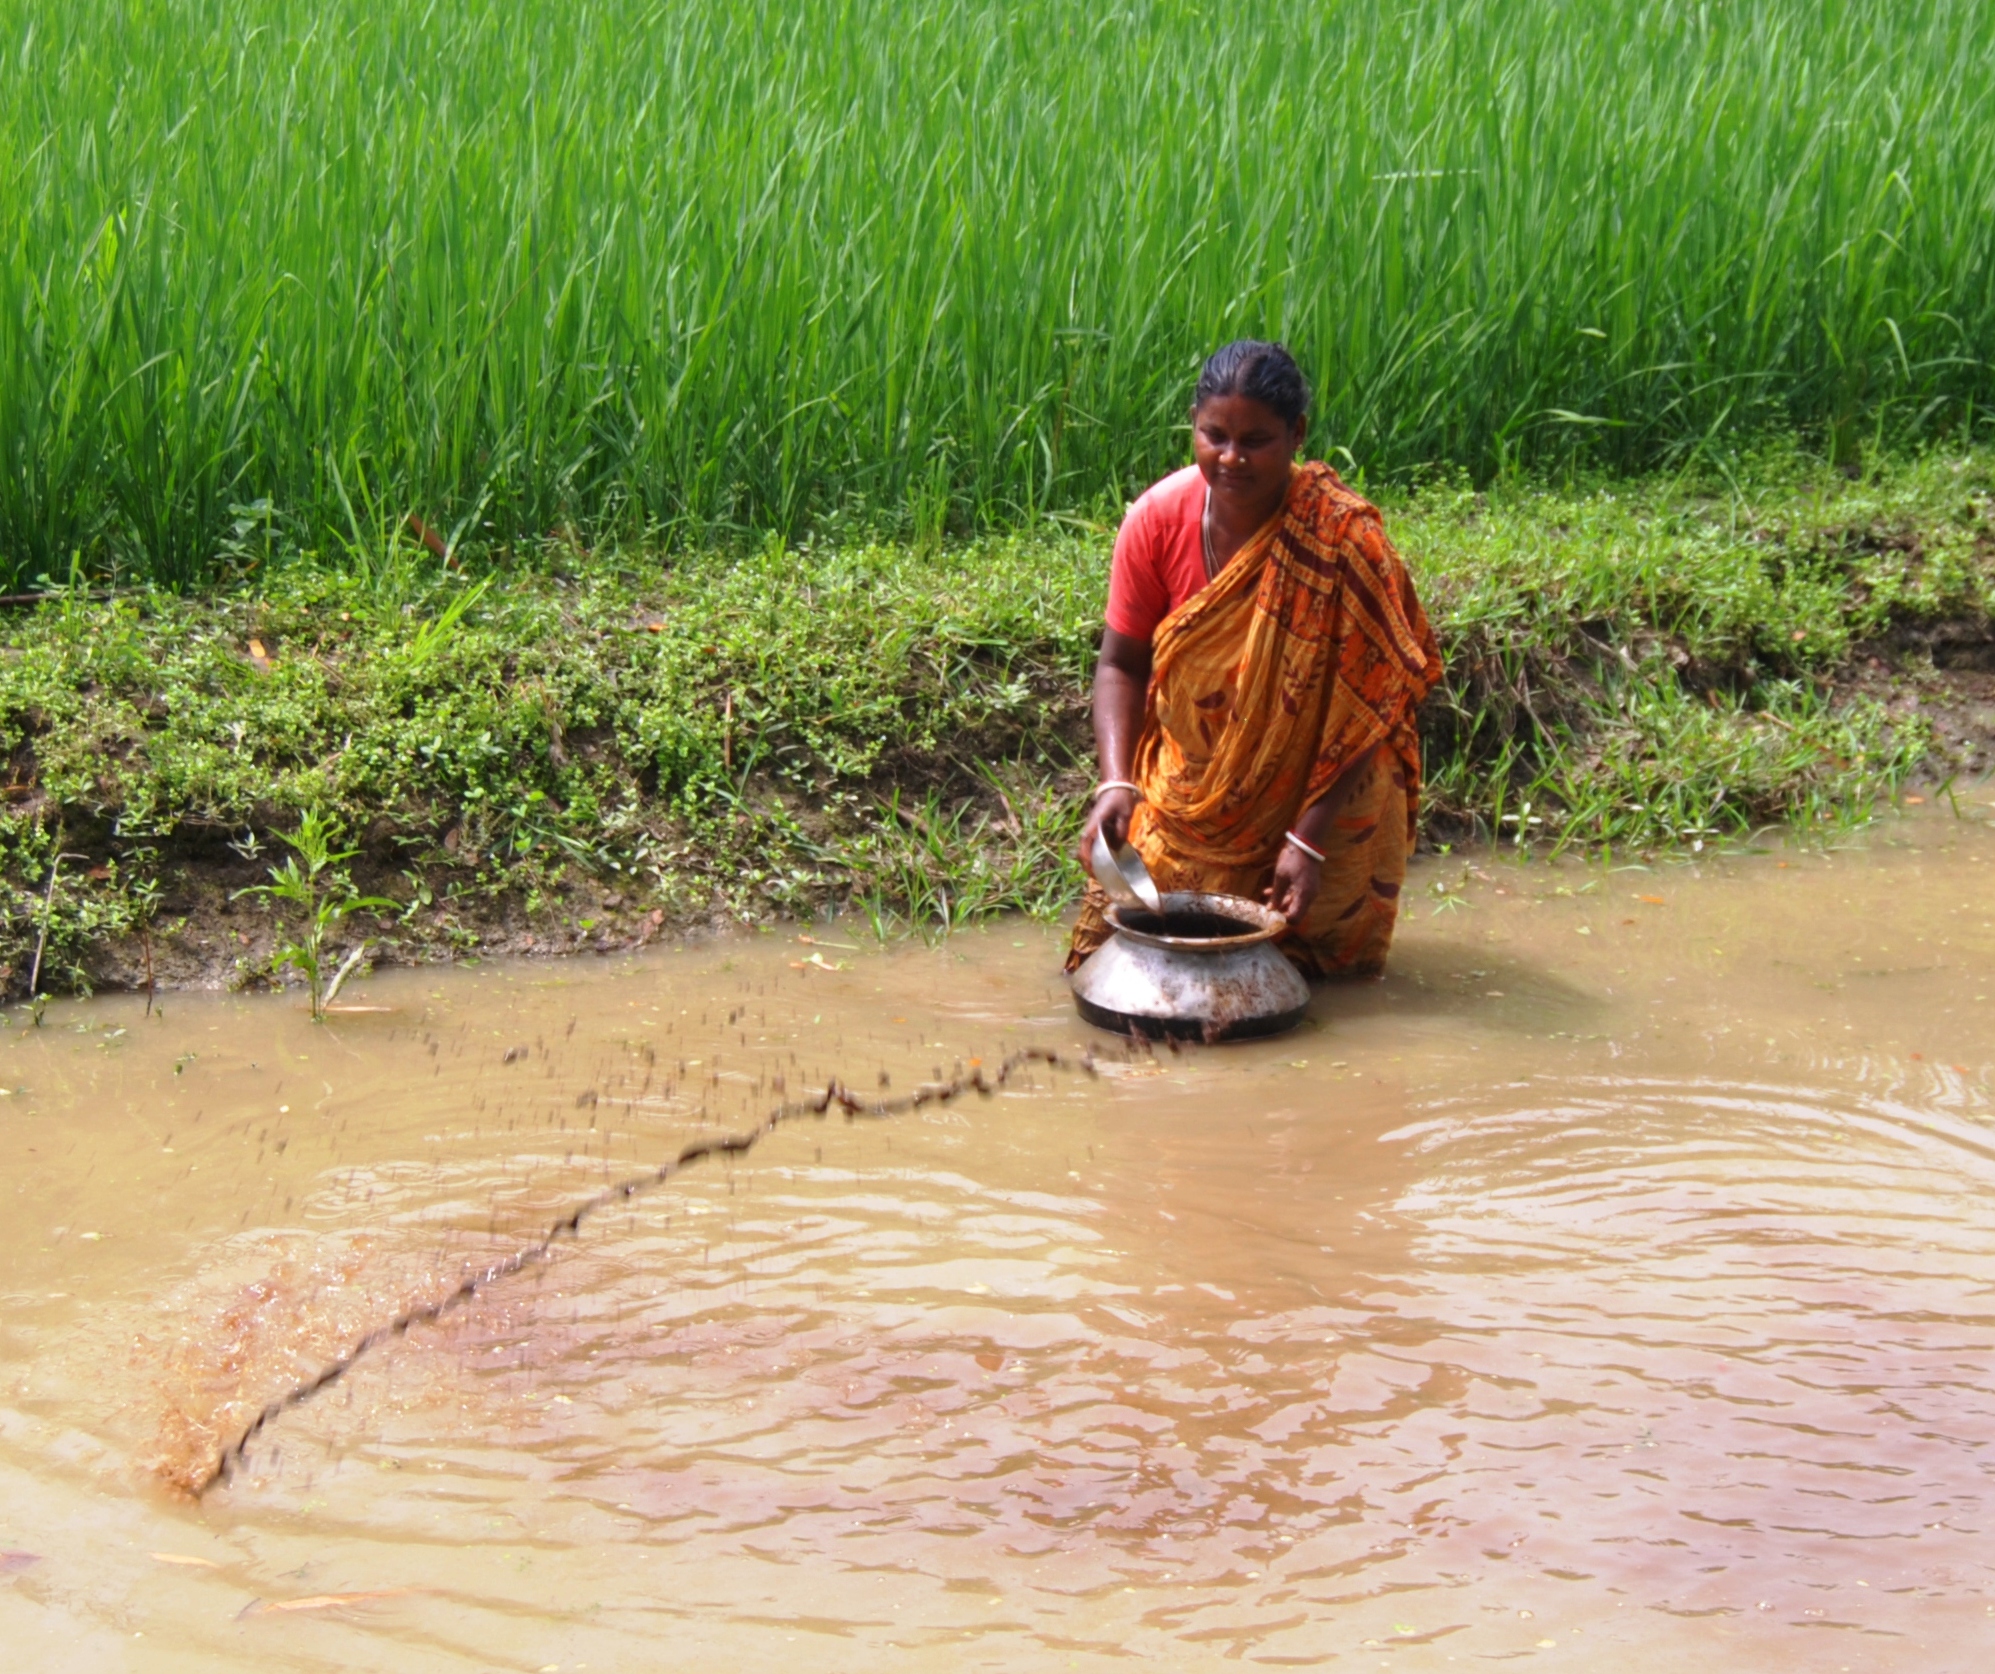 While fish get plenty to eat naturally in rice fields, many farmers in Bangladesh show respect to marine life by feeding them additional treats. Image Credit: WorldFish, Flickr.